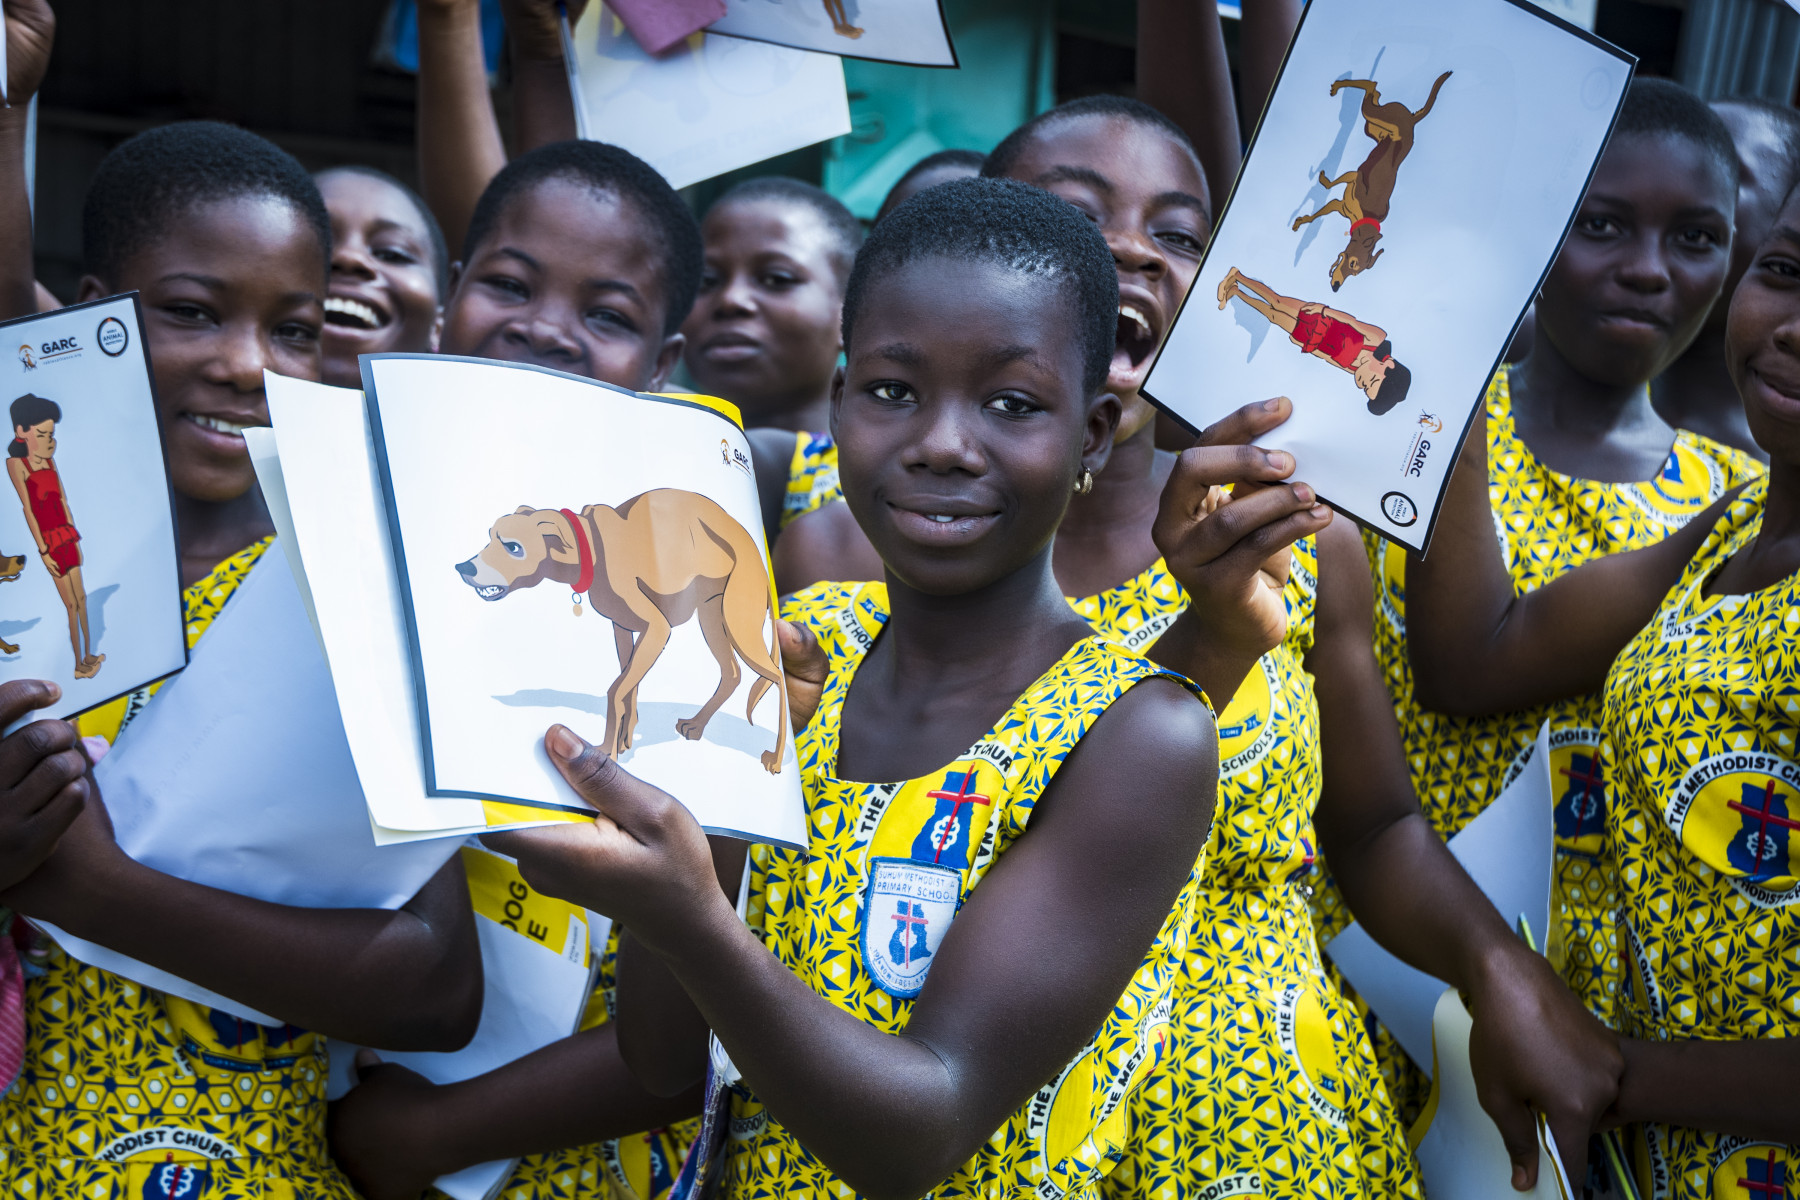 Children holding up a World Animal Protection book about dogs